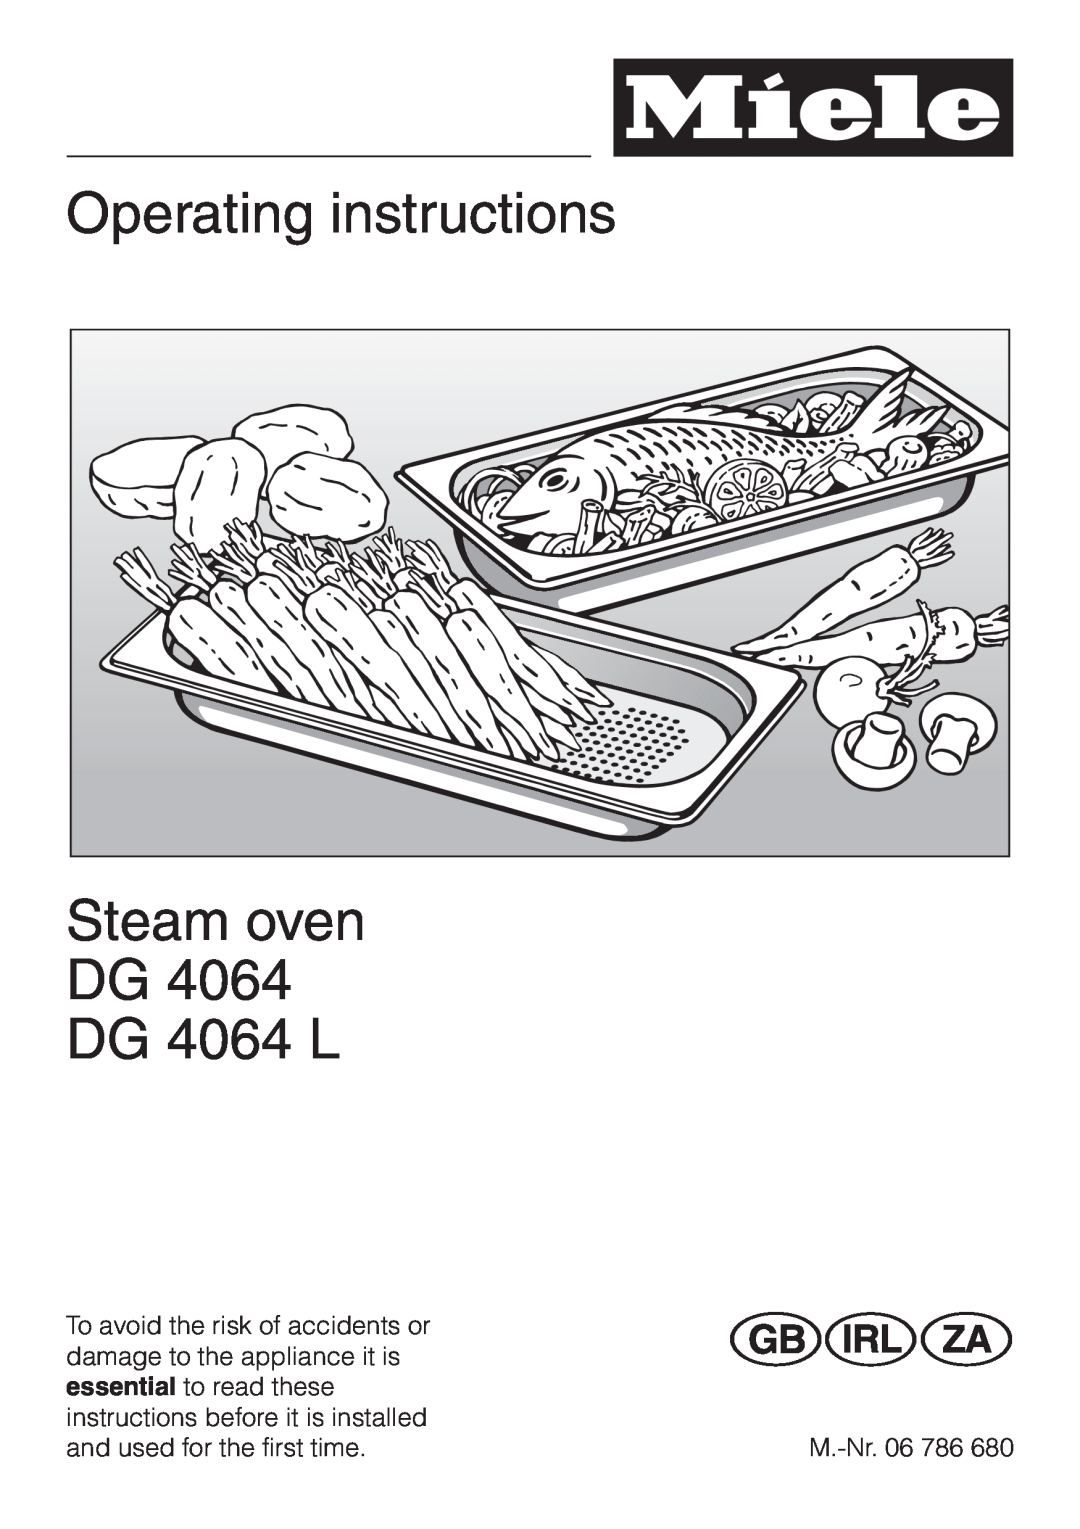 Miele manual Operating instructions Steam oven DG DG 4064 L 